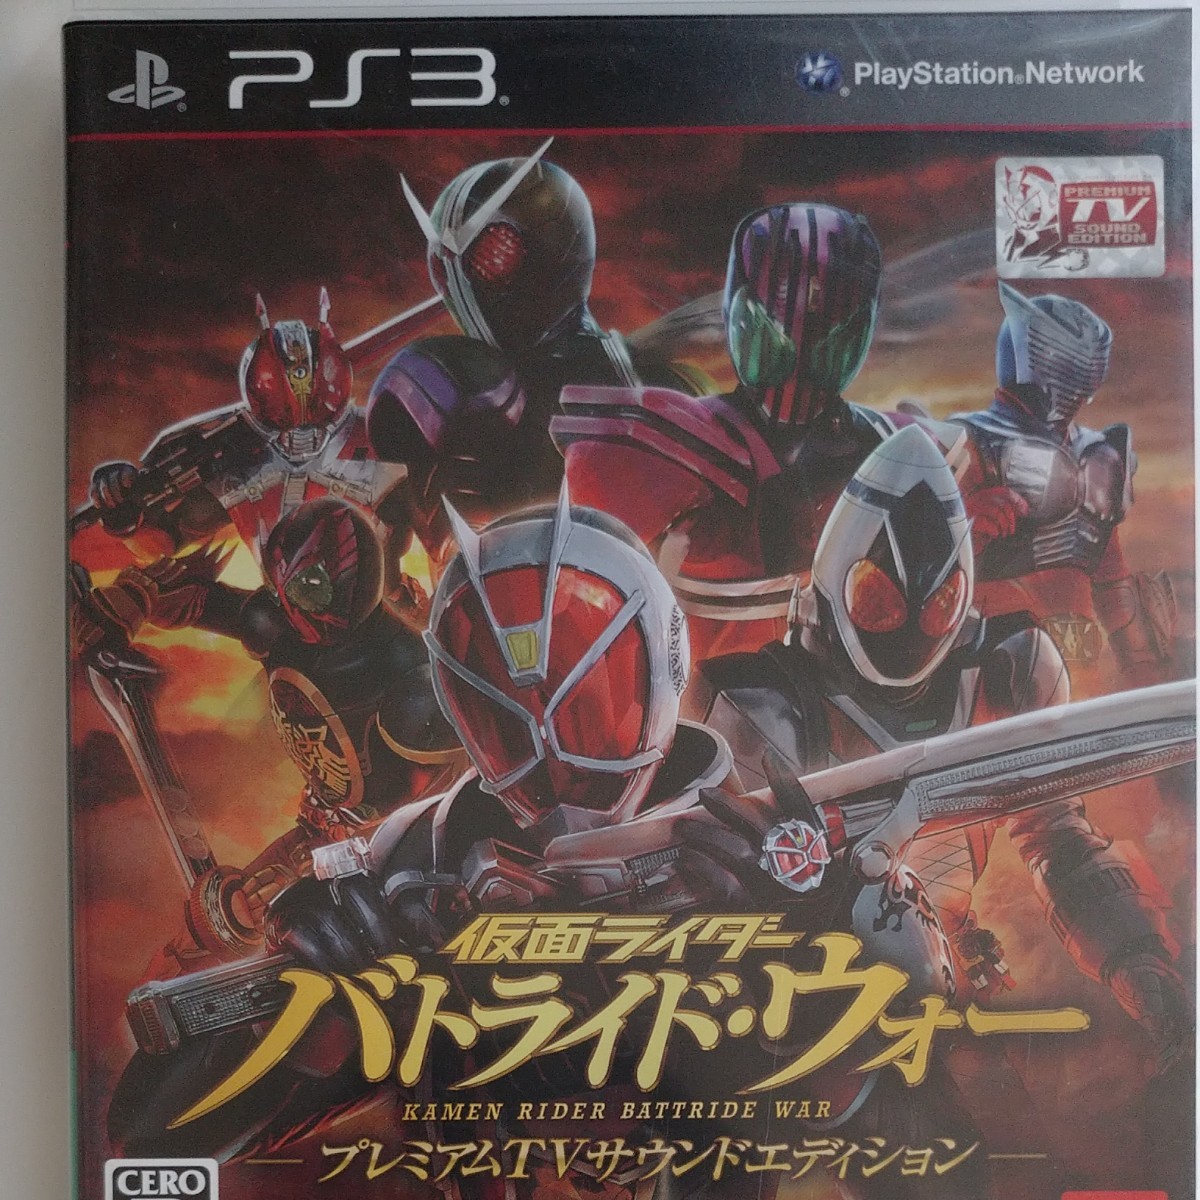 Paypayフリマ Ps3 仮面ﾗｲﾀﾞｰ ﾊﾞﾄﾗｲﾄﾞ ｳｫｰ